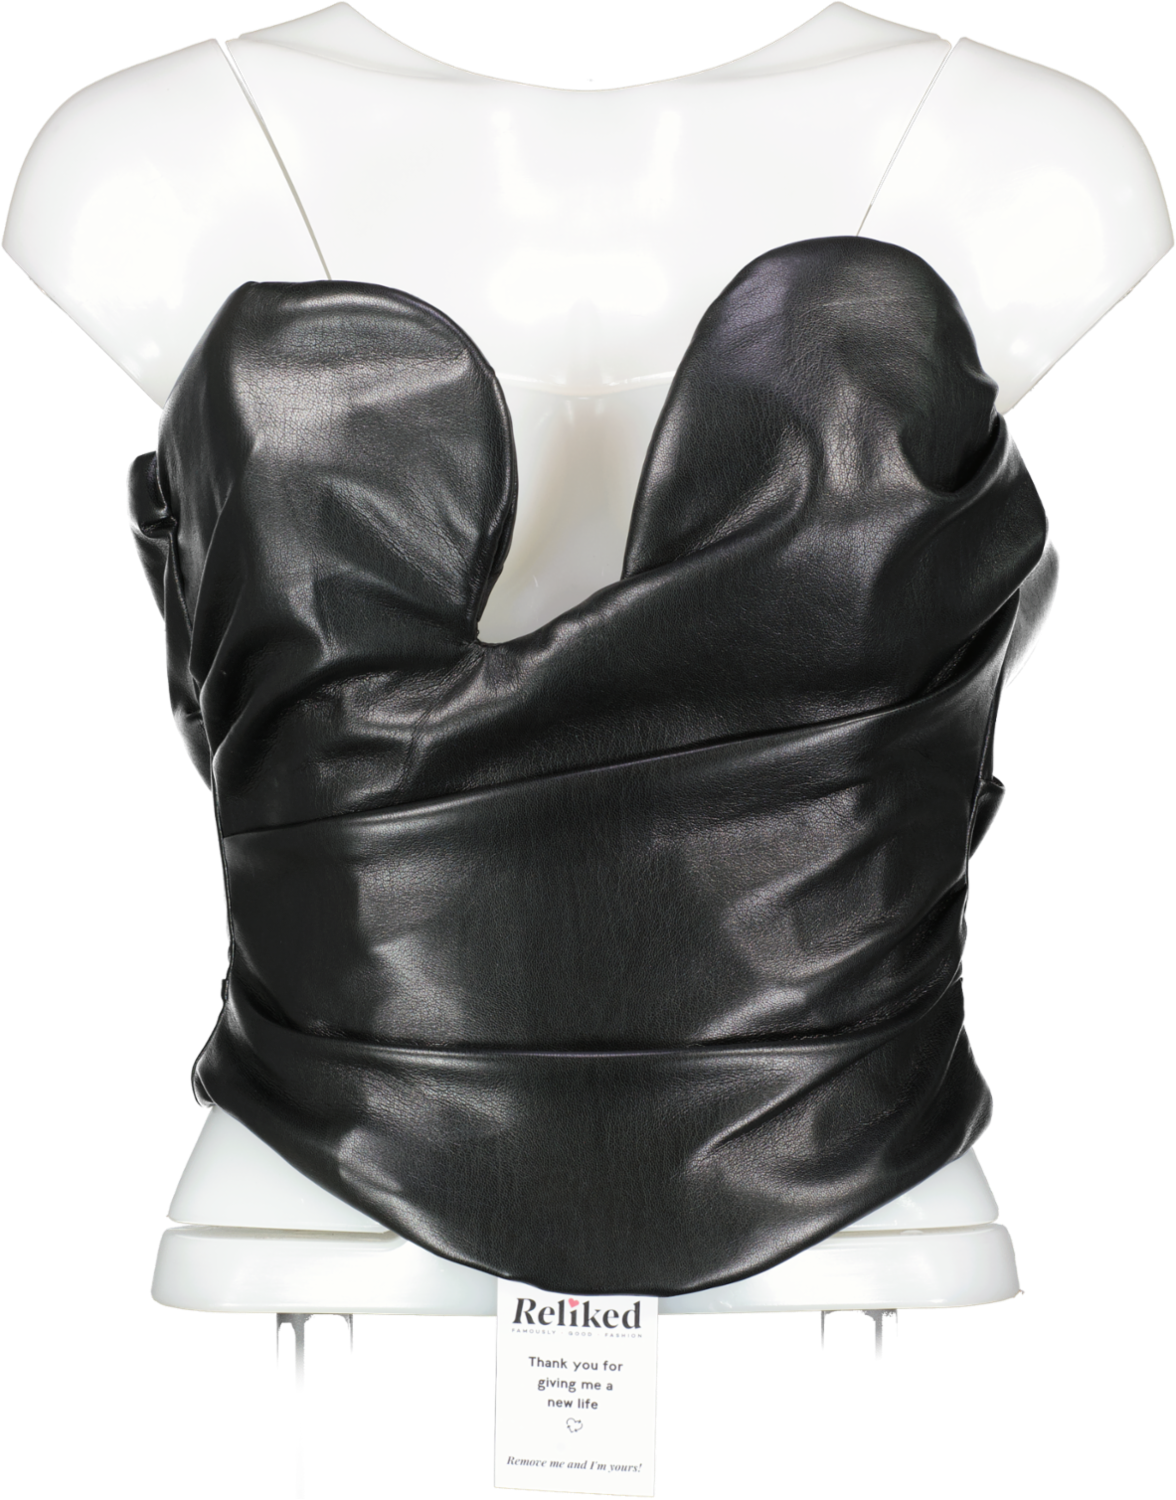 HOUSE OF CB Faux Leather Crop Corset Tank